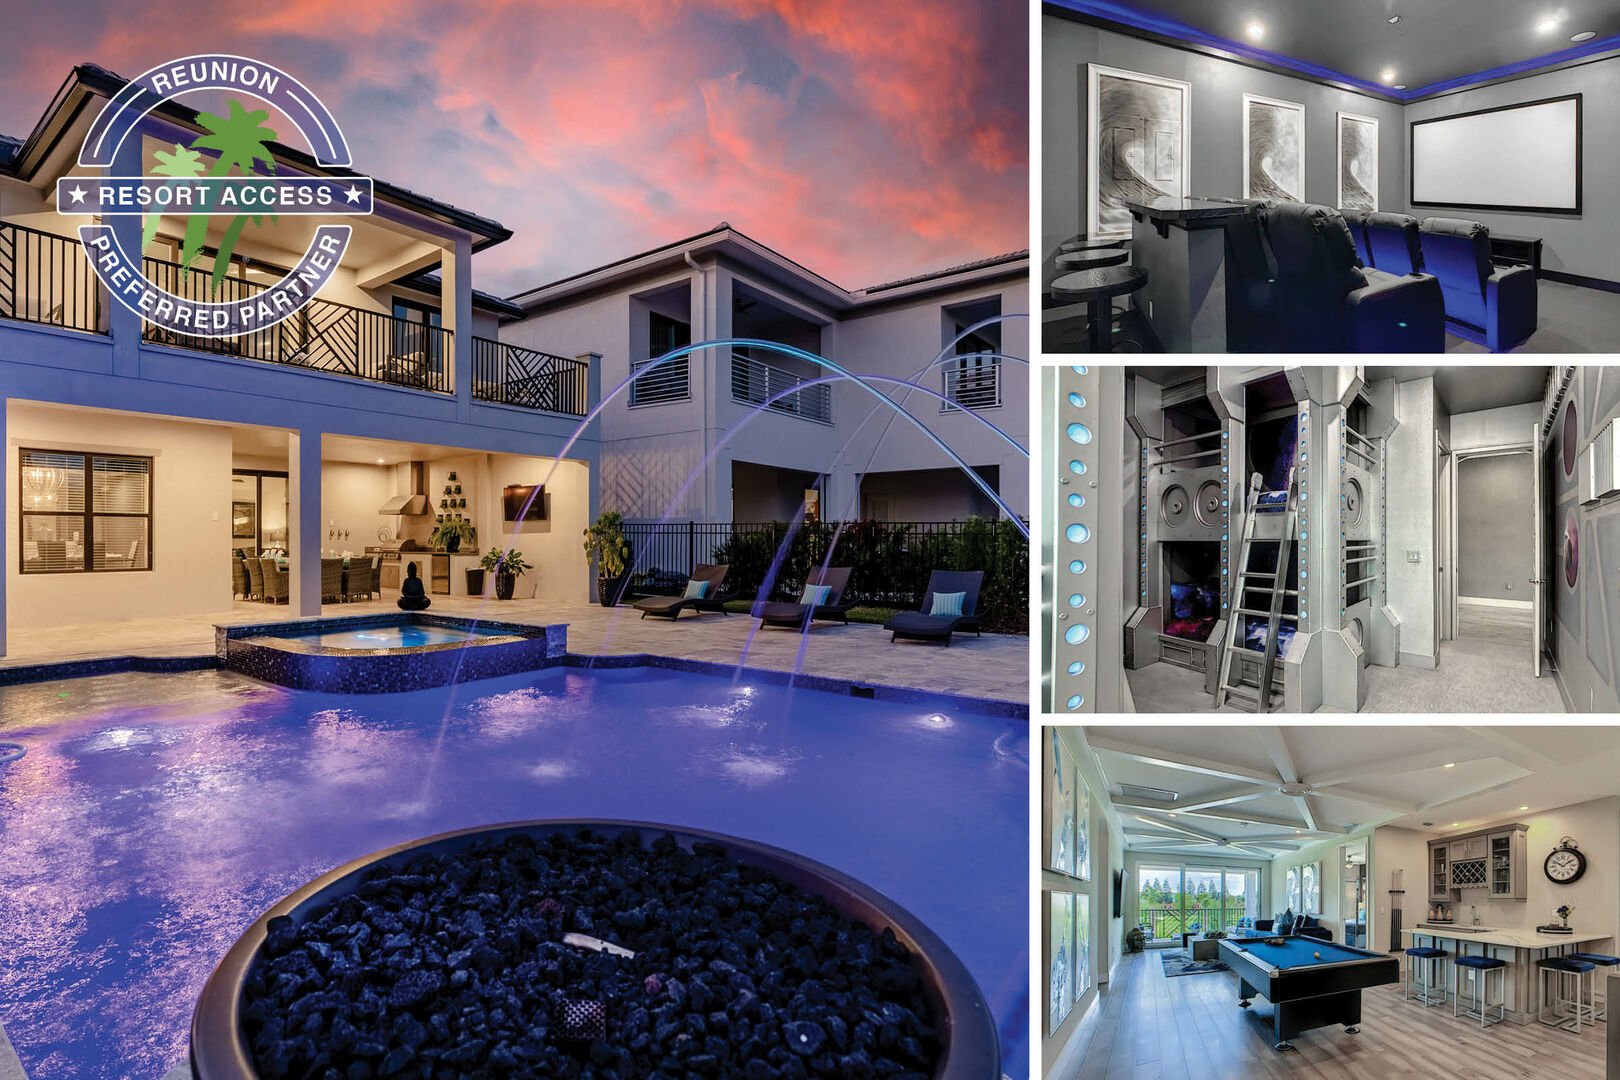 Welcome to Luxury Paradise Palace a modern, immaculate, and luxurious villa that features 6-bedrooms and 6.5-bathrooms located in the prestigious Bear's Den Club at Reunion Resort. |